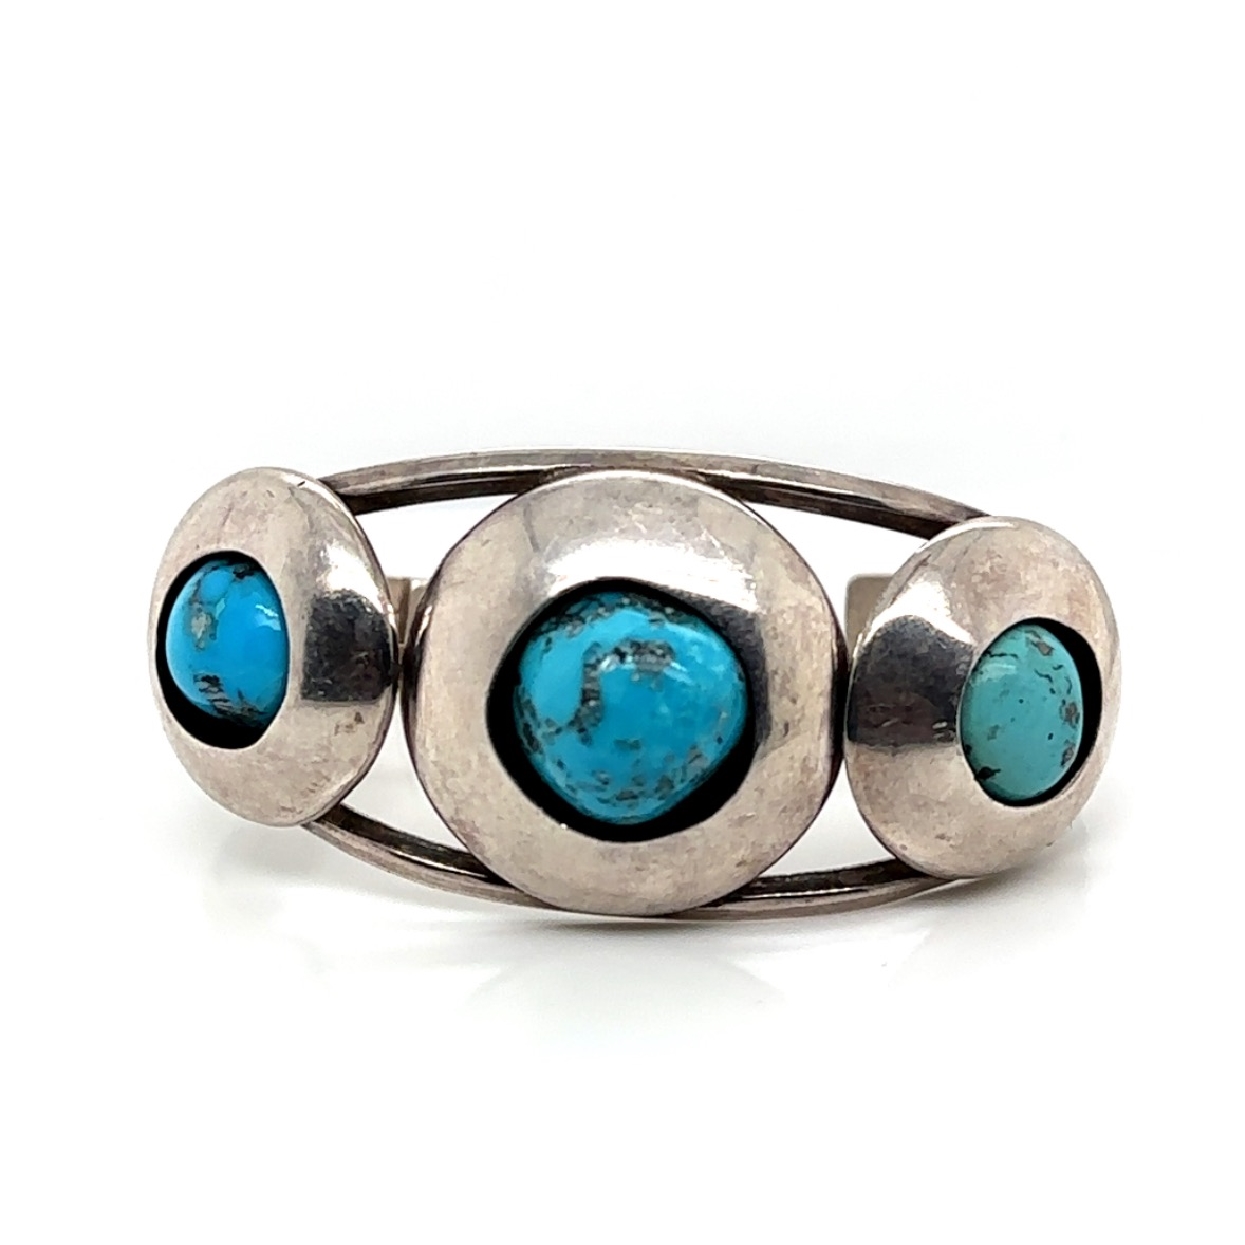 Sterling Silver and Turquoise Native American Cuff

Fits 7 Inch Wrist
1 Inch at Widest